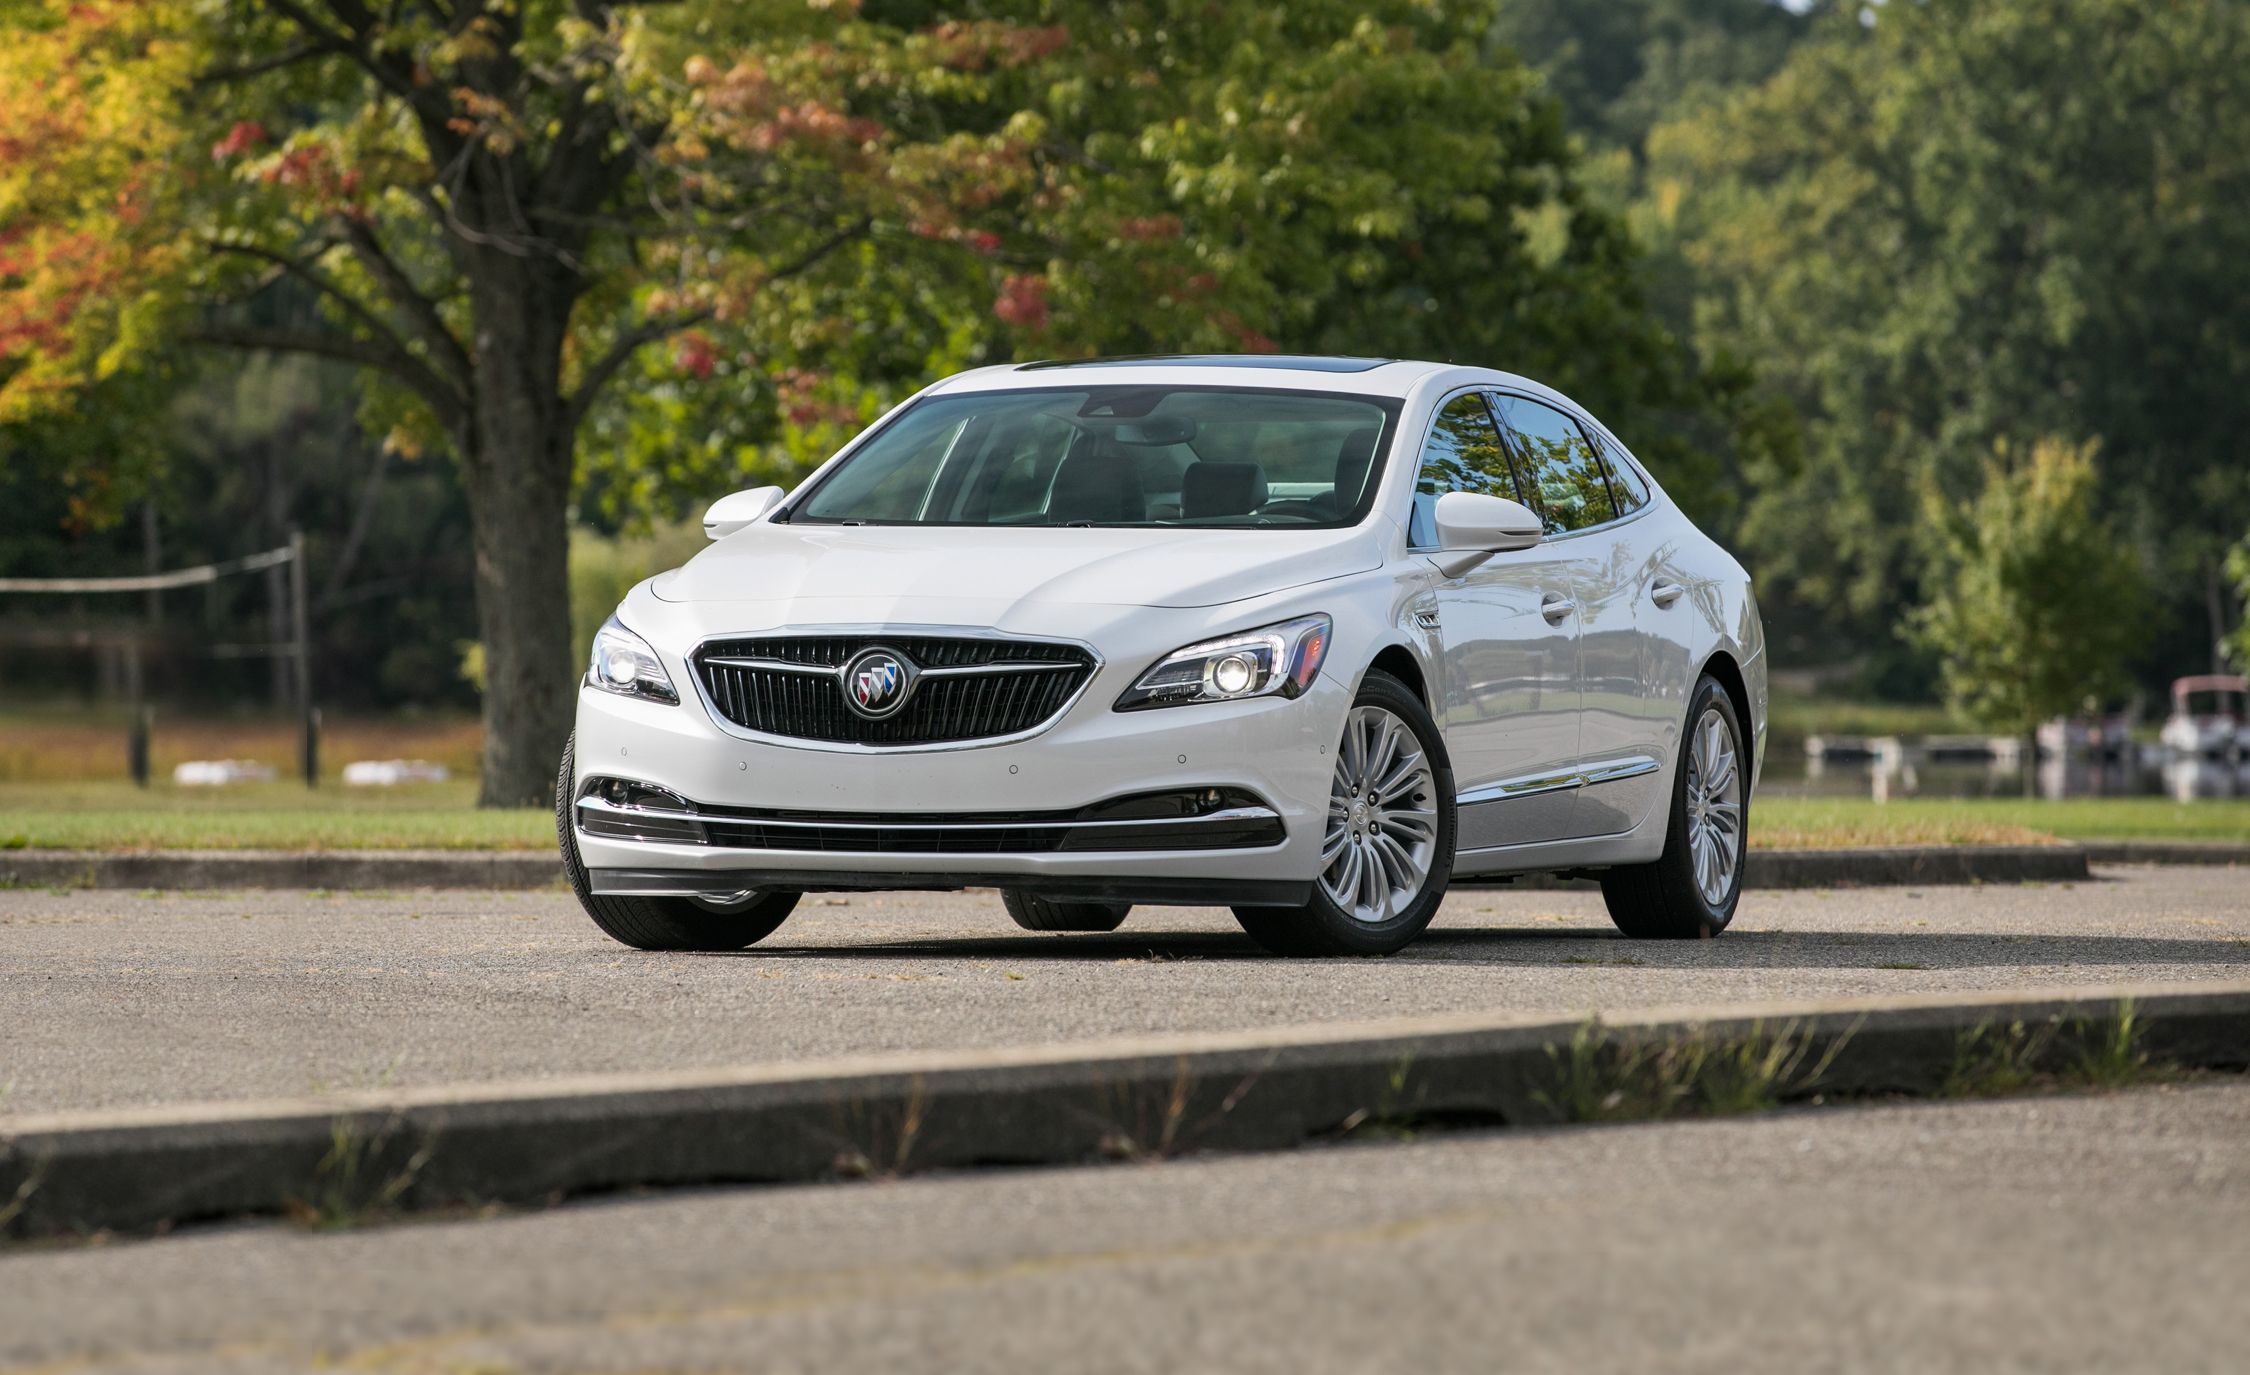 2018 Buick LaCrosse Review, Pricing, and Specs